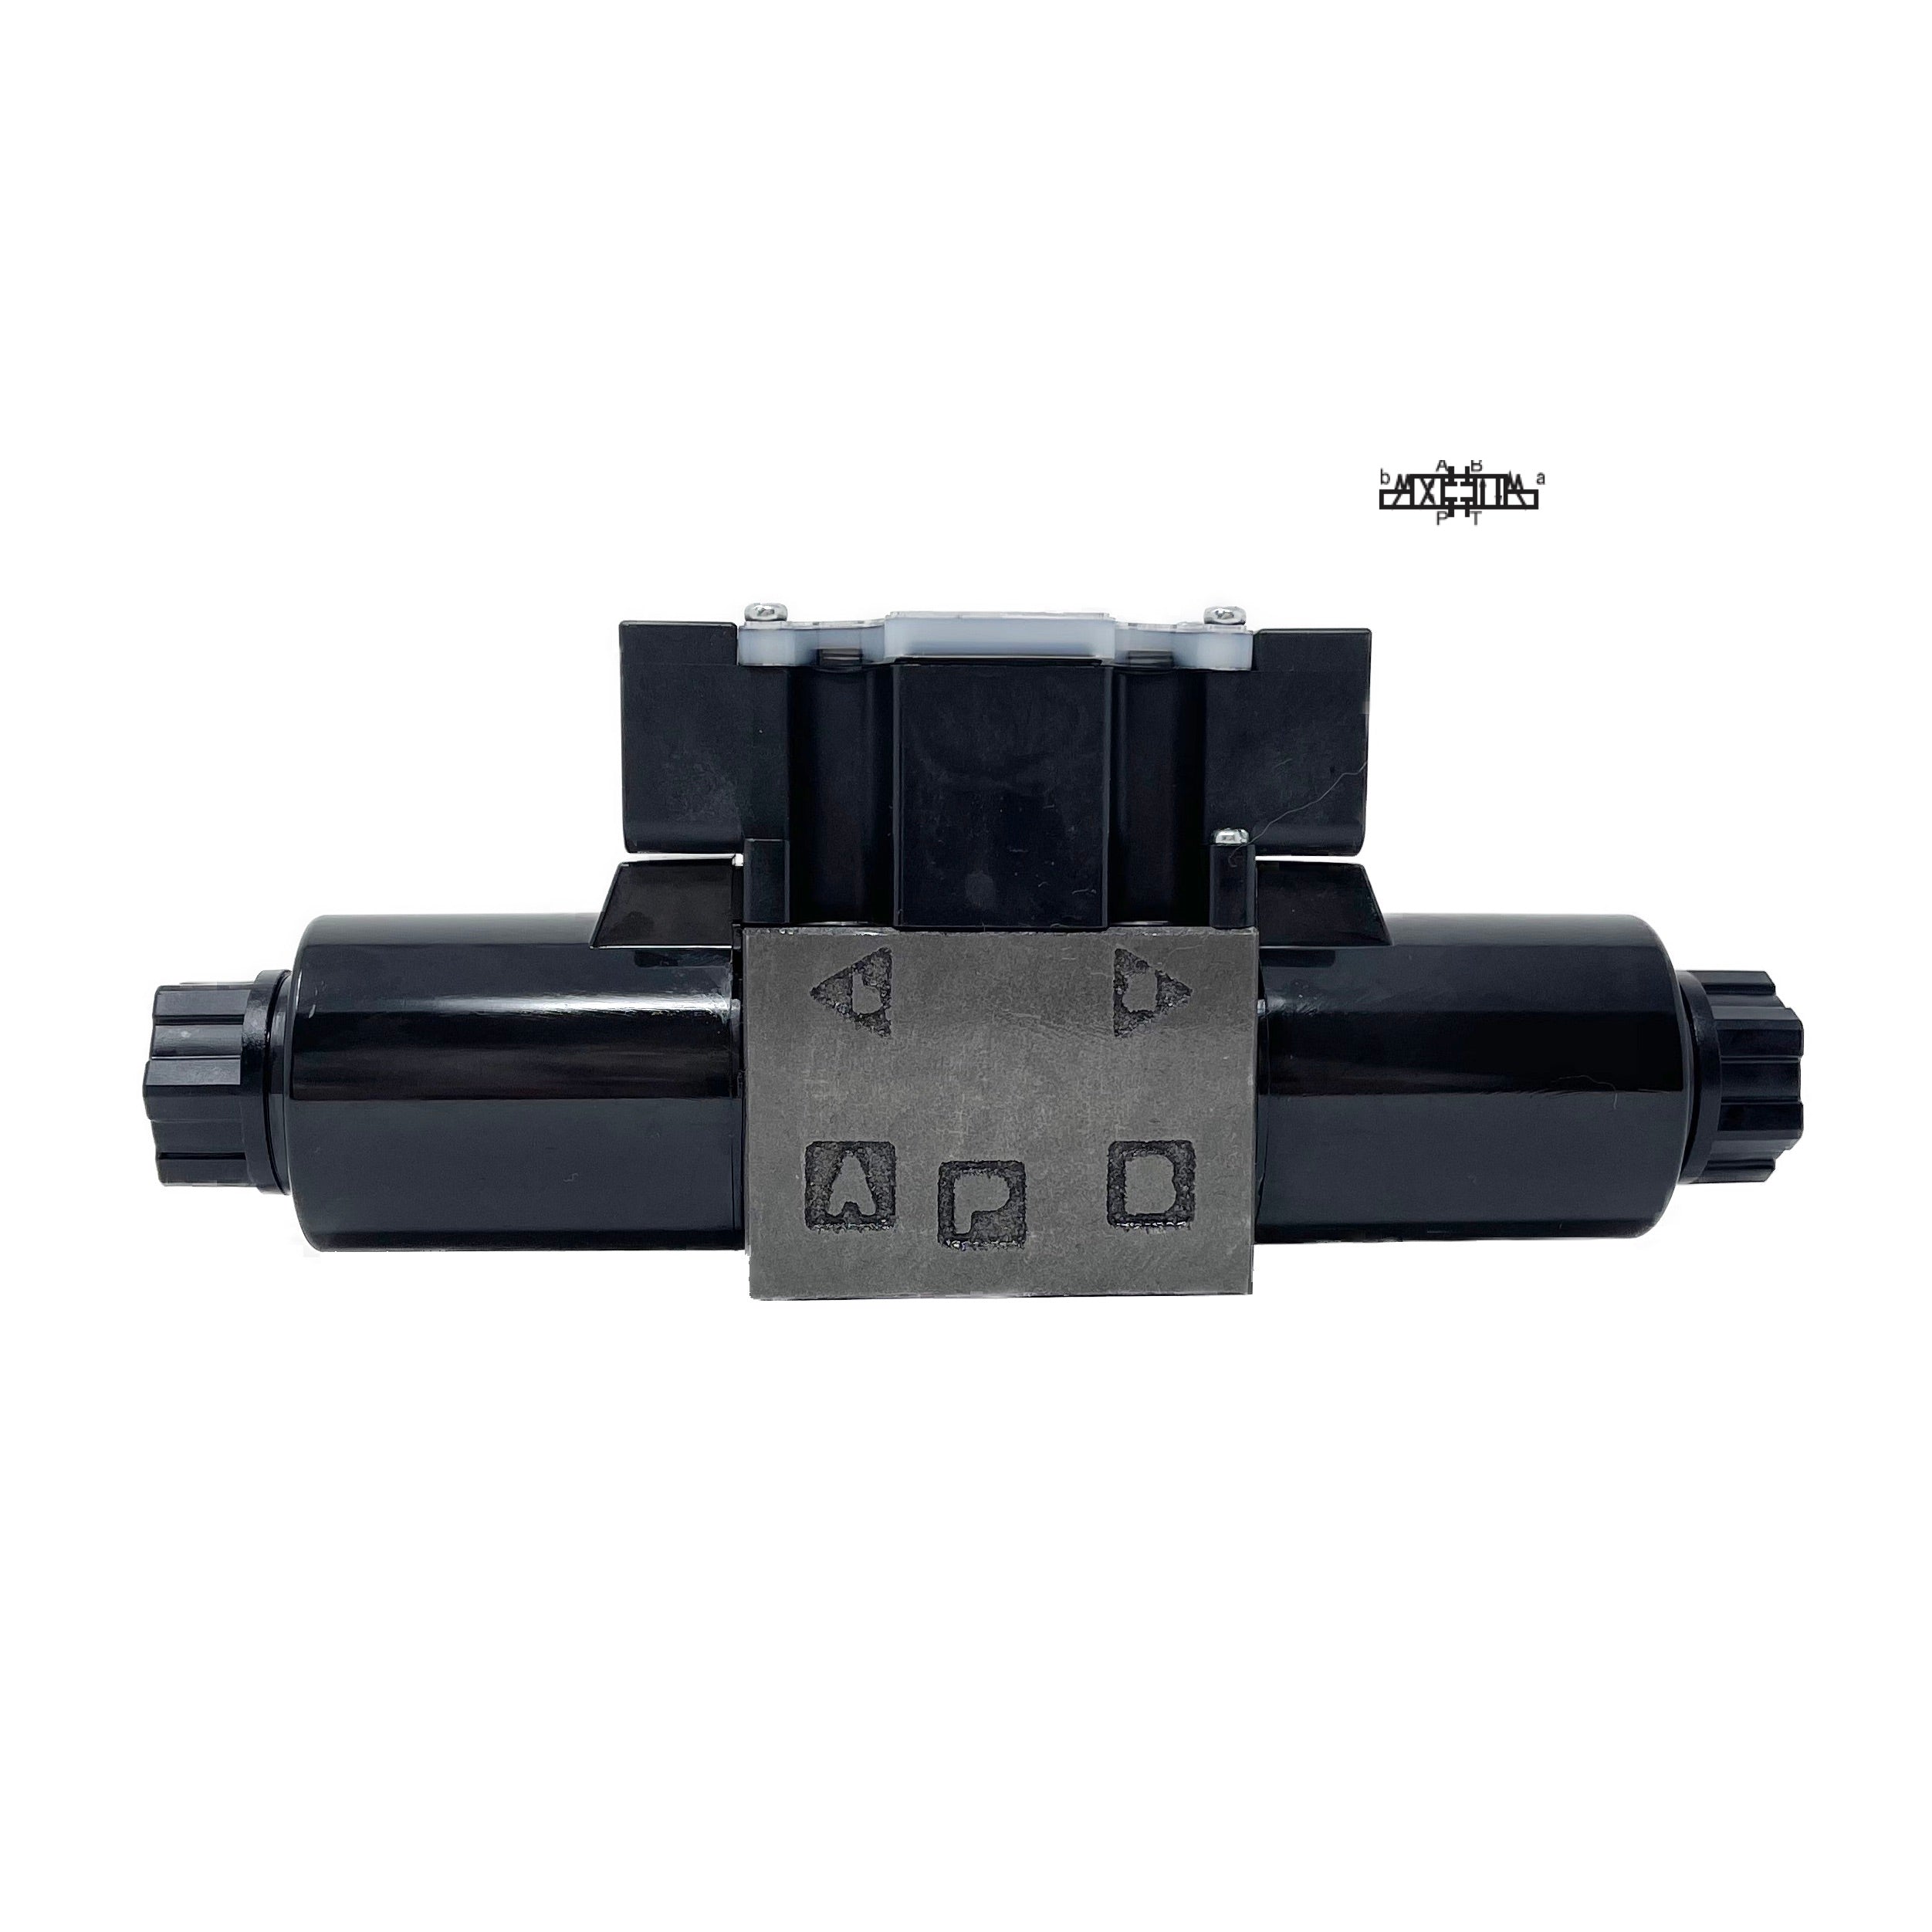 SS-G01-C5-GR-D2-E31 : Nachi Solenoid Valve, 3P4W, D03 (NG6), 26.4GPM, 5075psi, All Ports Blocked Neutral, 24 VDC, Surgeless Type, Wiring Box with Lights